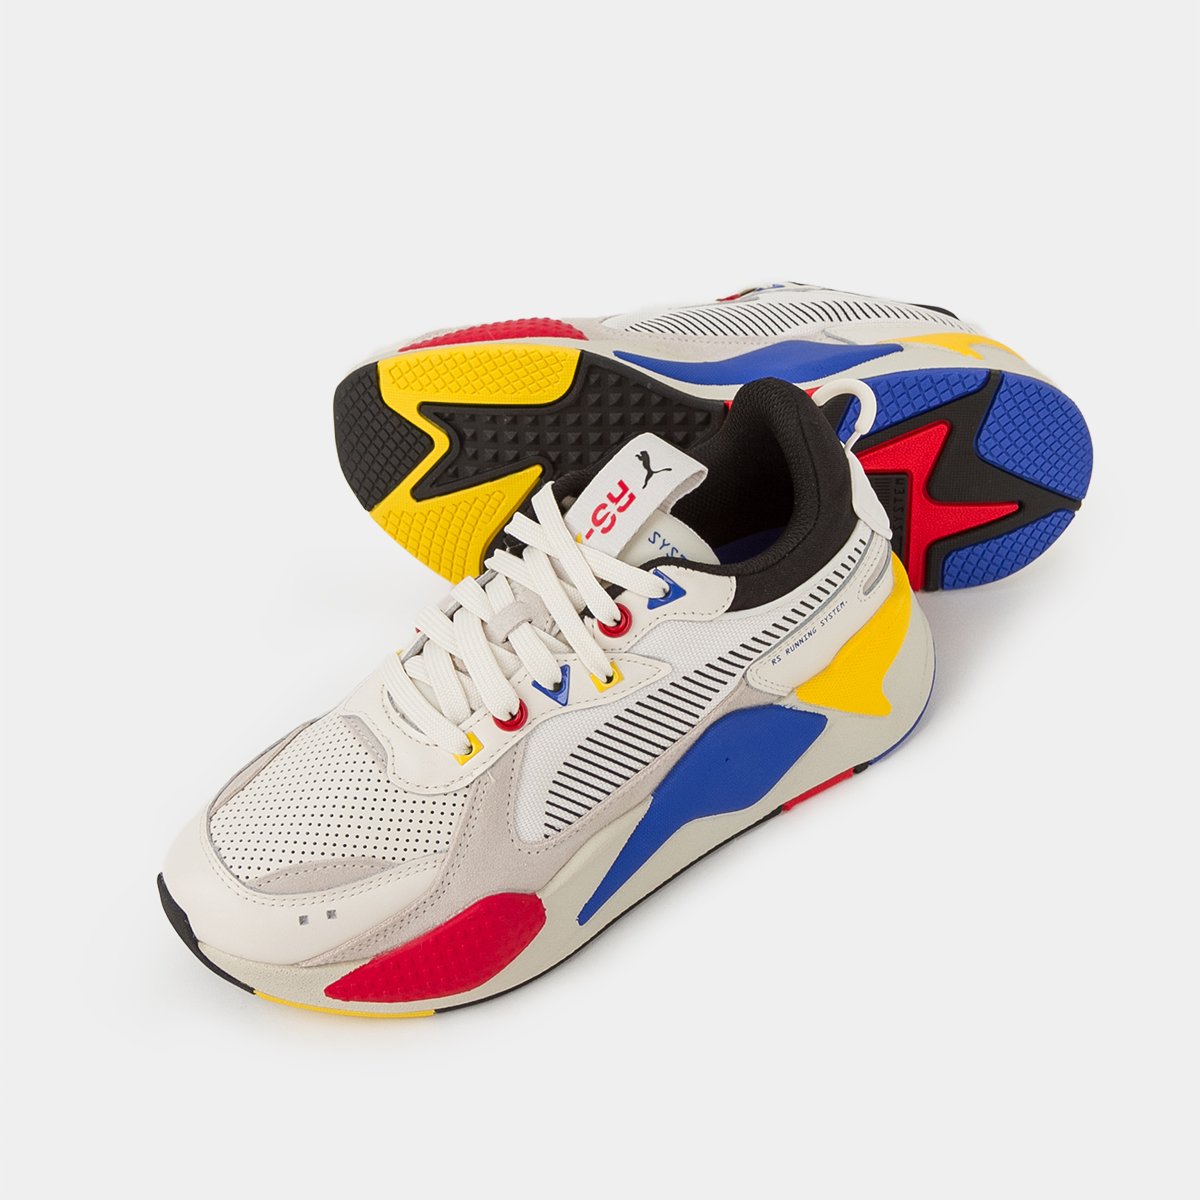 Puma RS Running System. Puma RS-X Colour Theory. Puma Running System 2020. Adidas RS Running System. Colorful x17 at 23